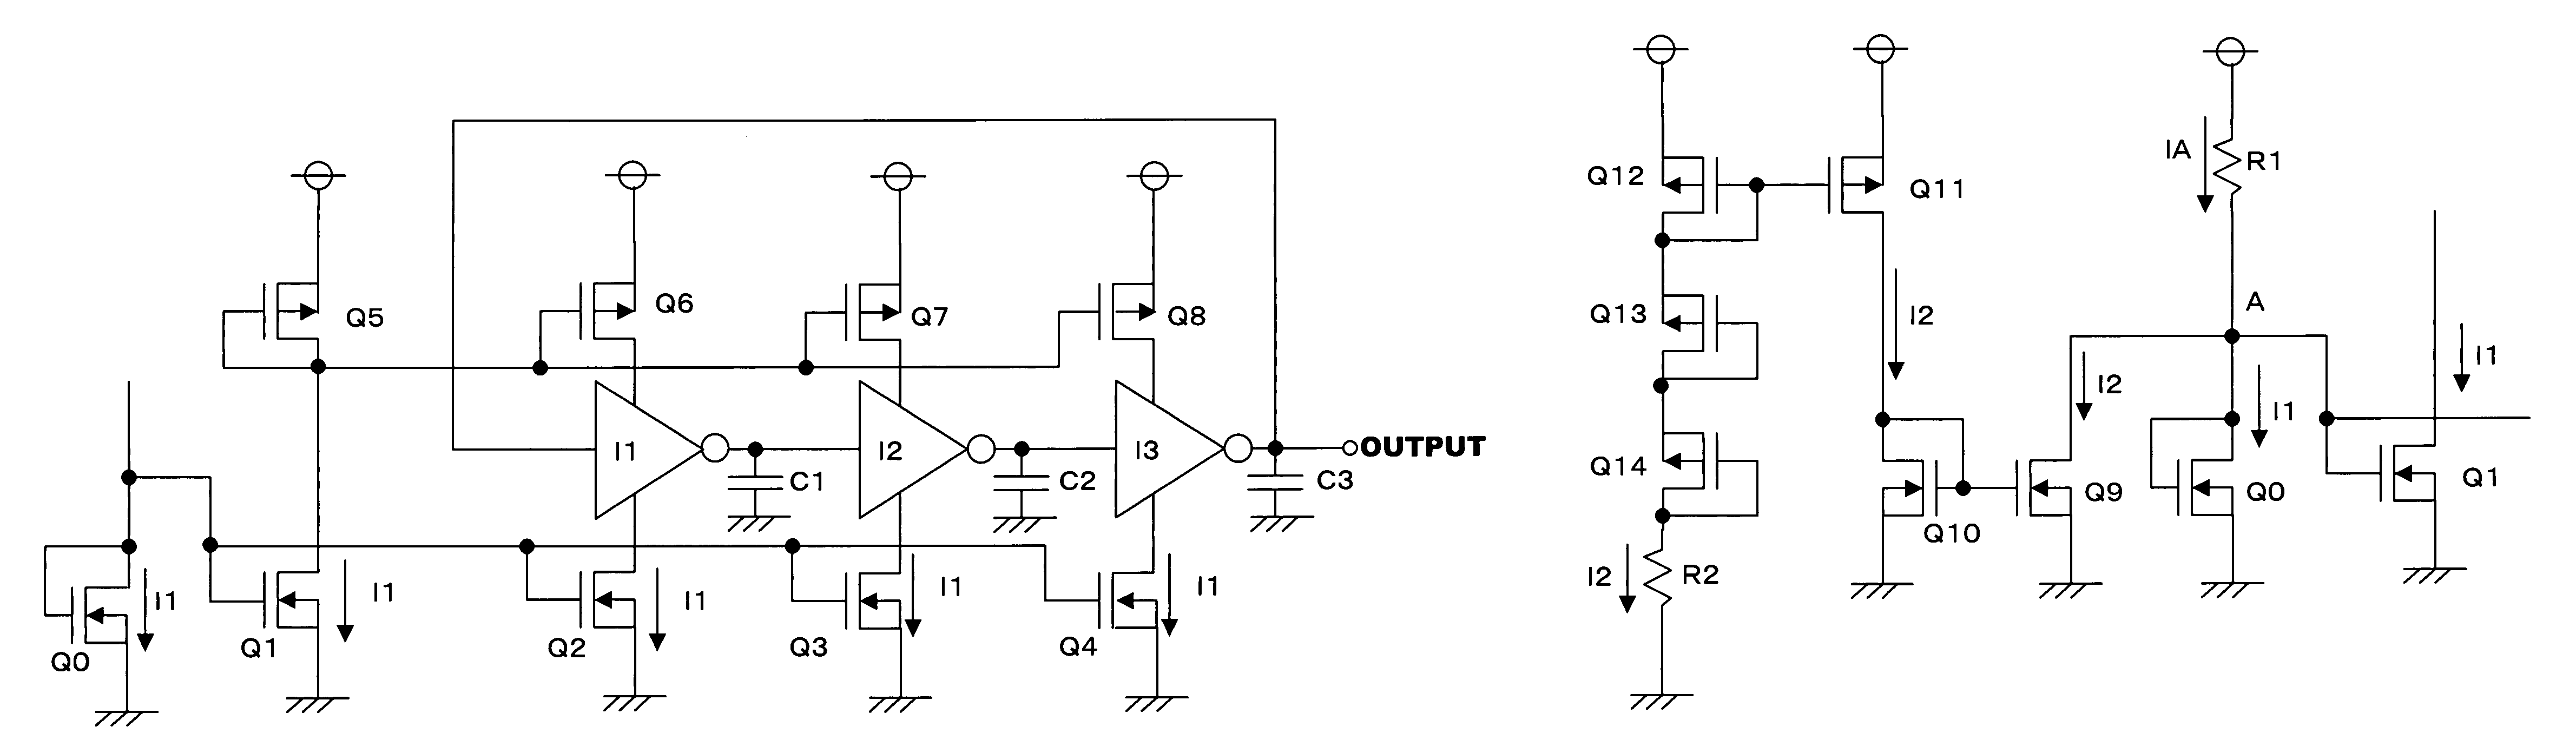 Constant current circuit used for ring oscillator and charge pump circuit